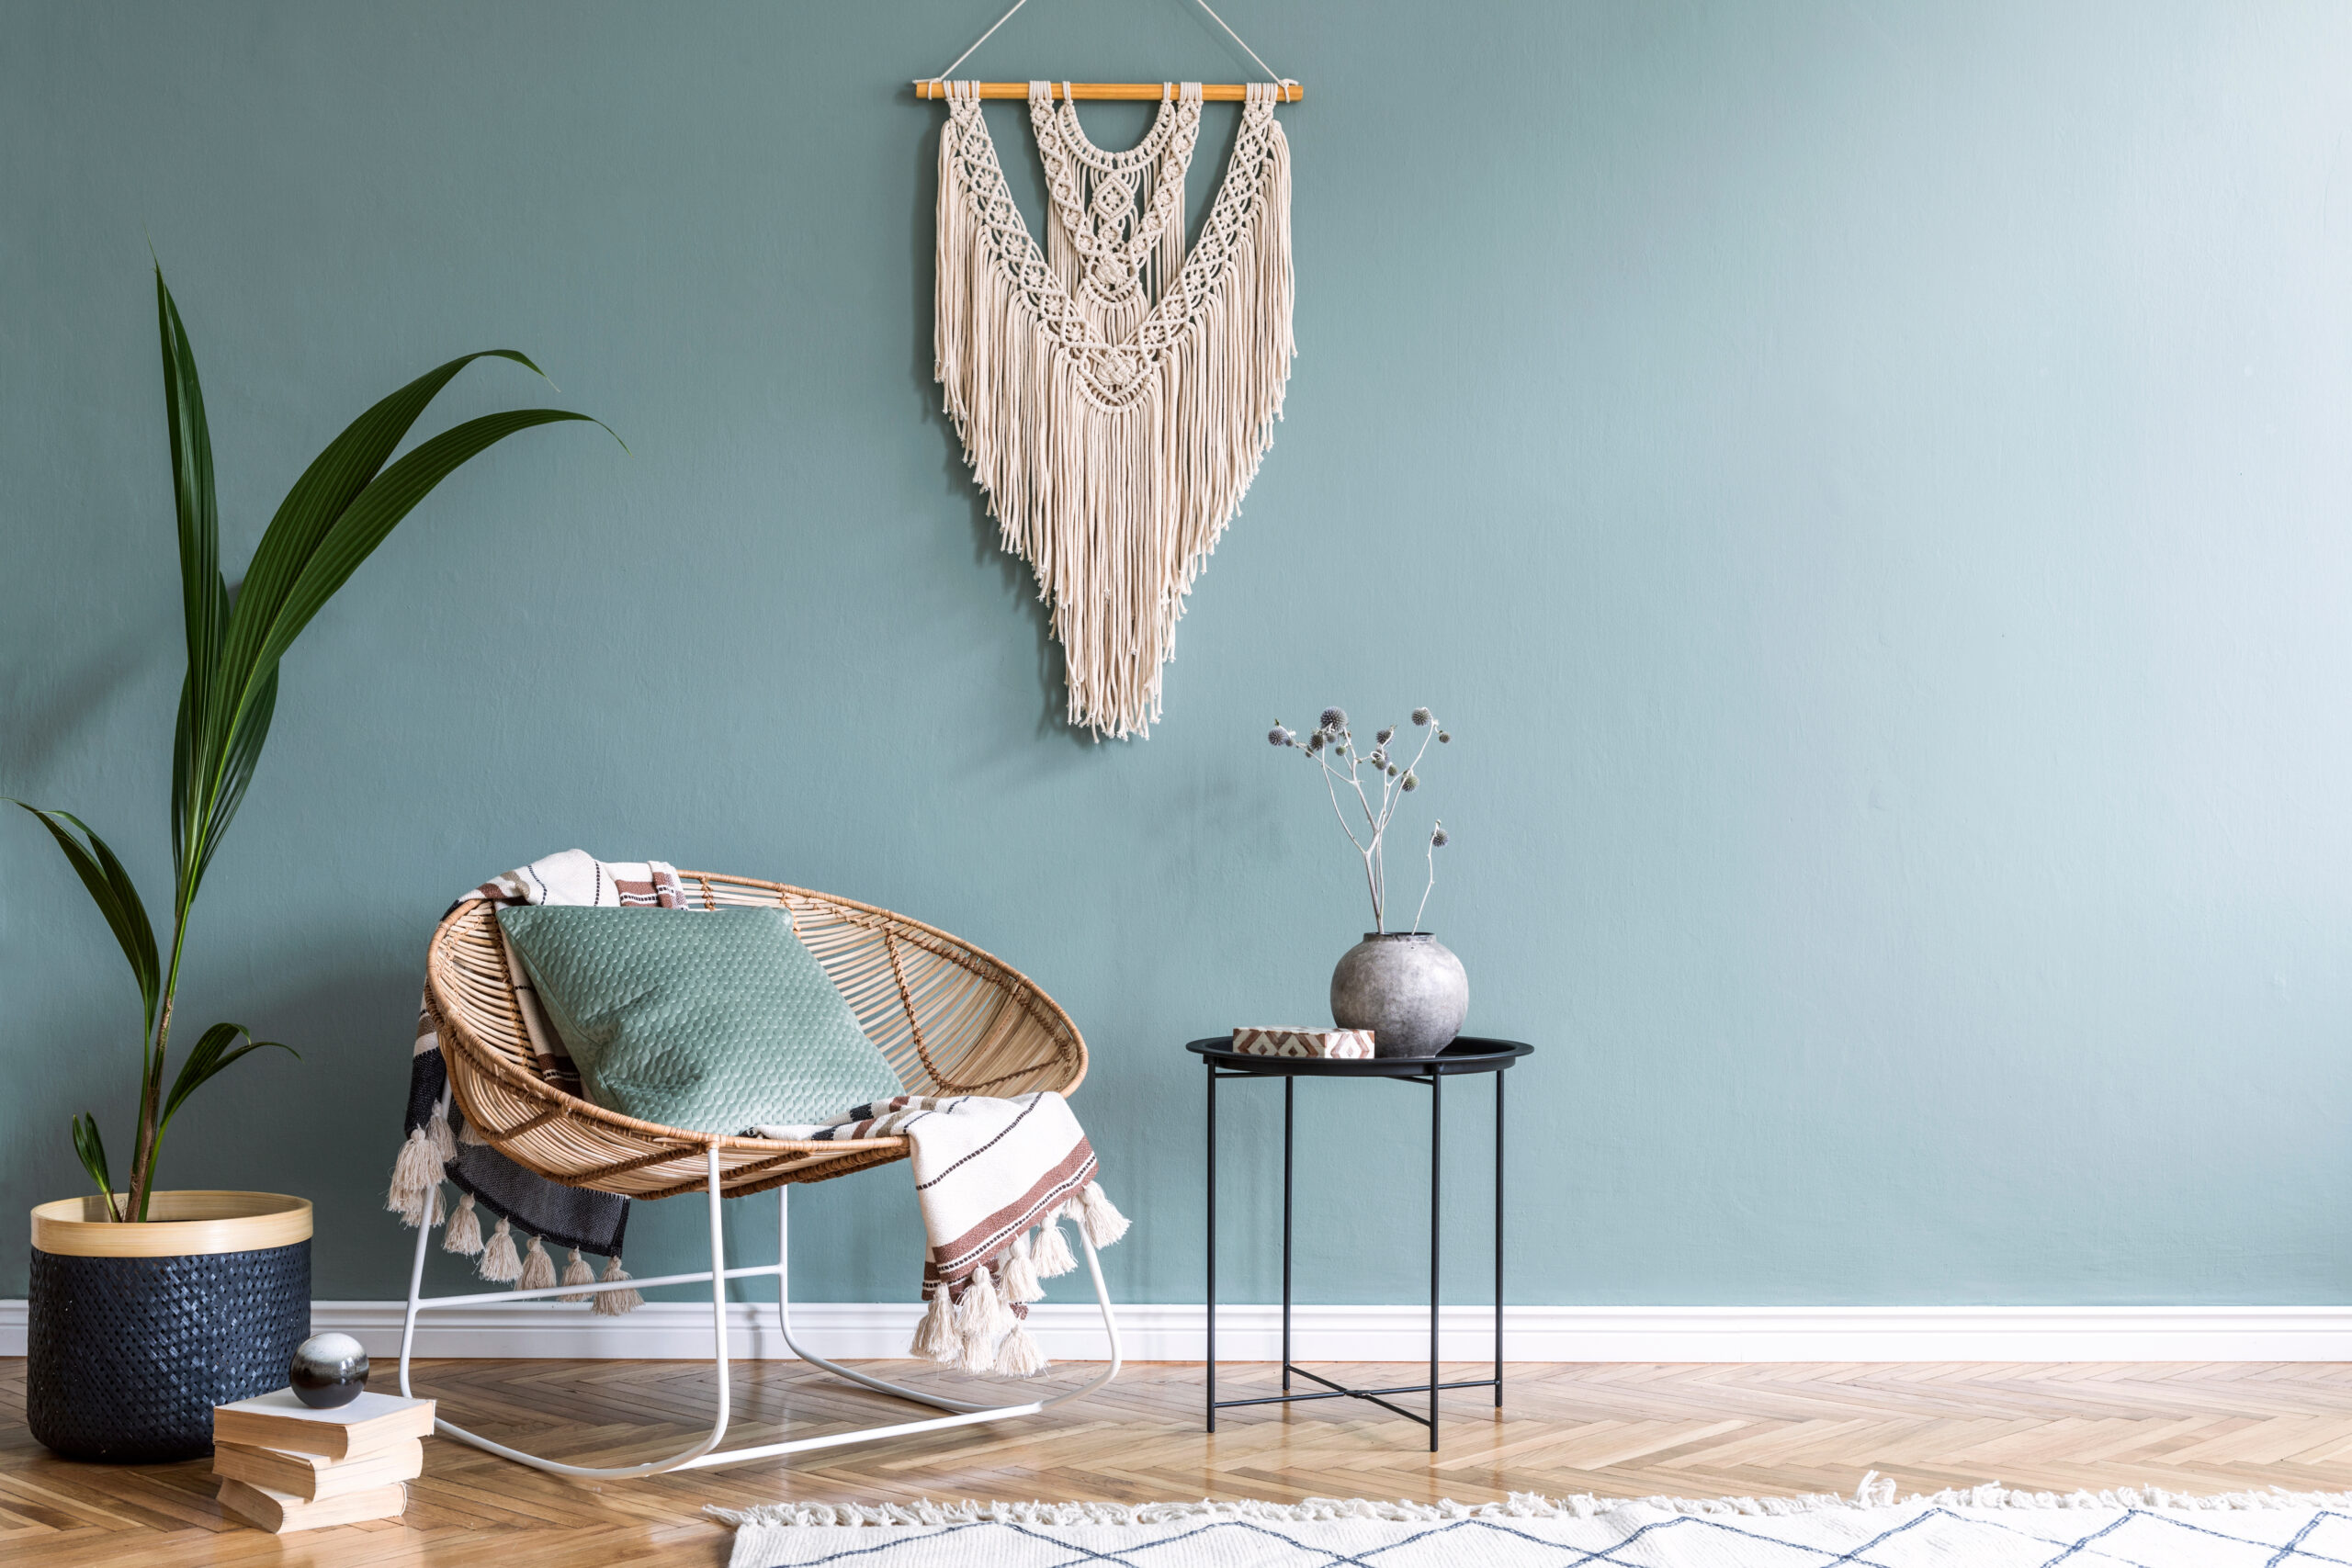 5 Colors That Make Every Home Happier